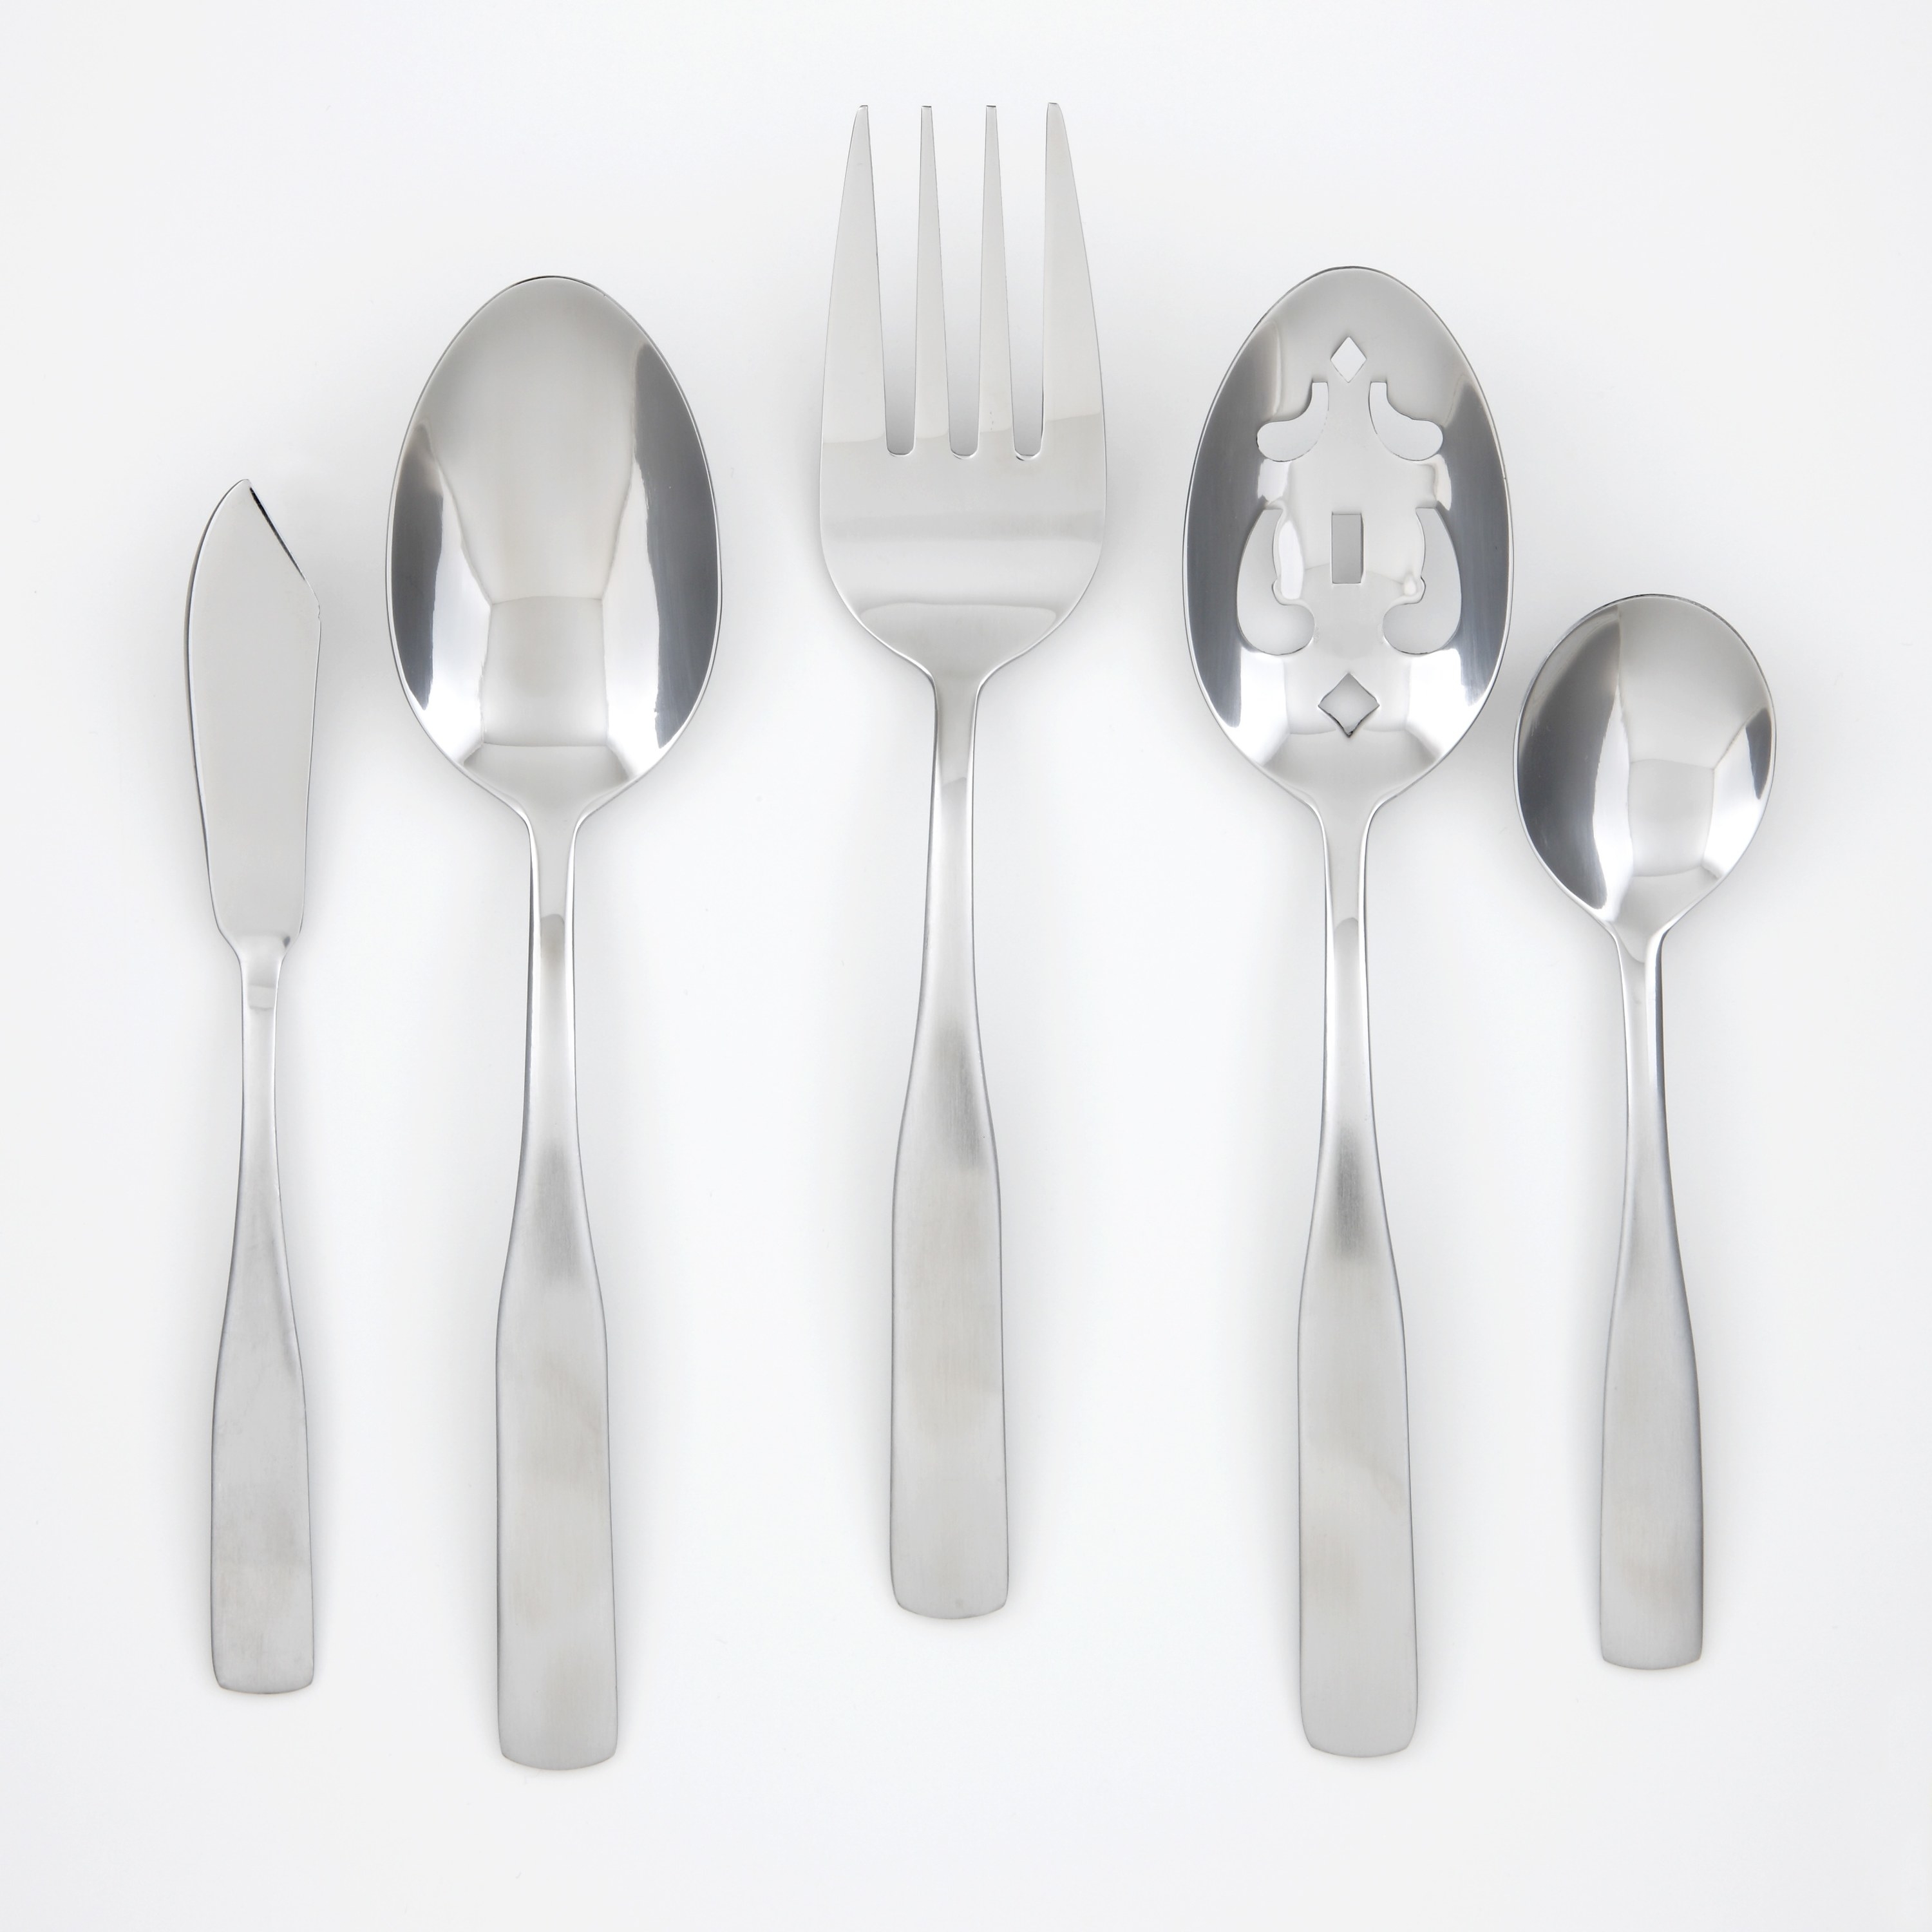 the flatware set including a spoon with decorative carved serving spoon